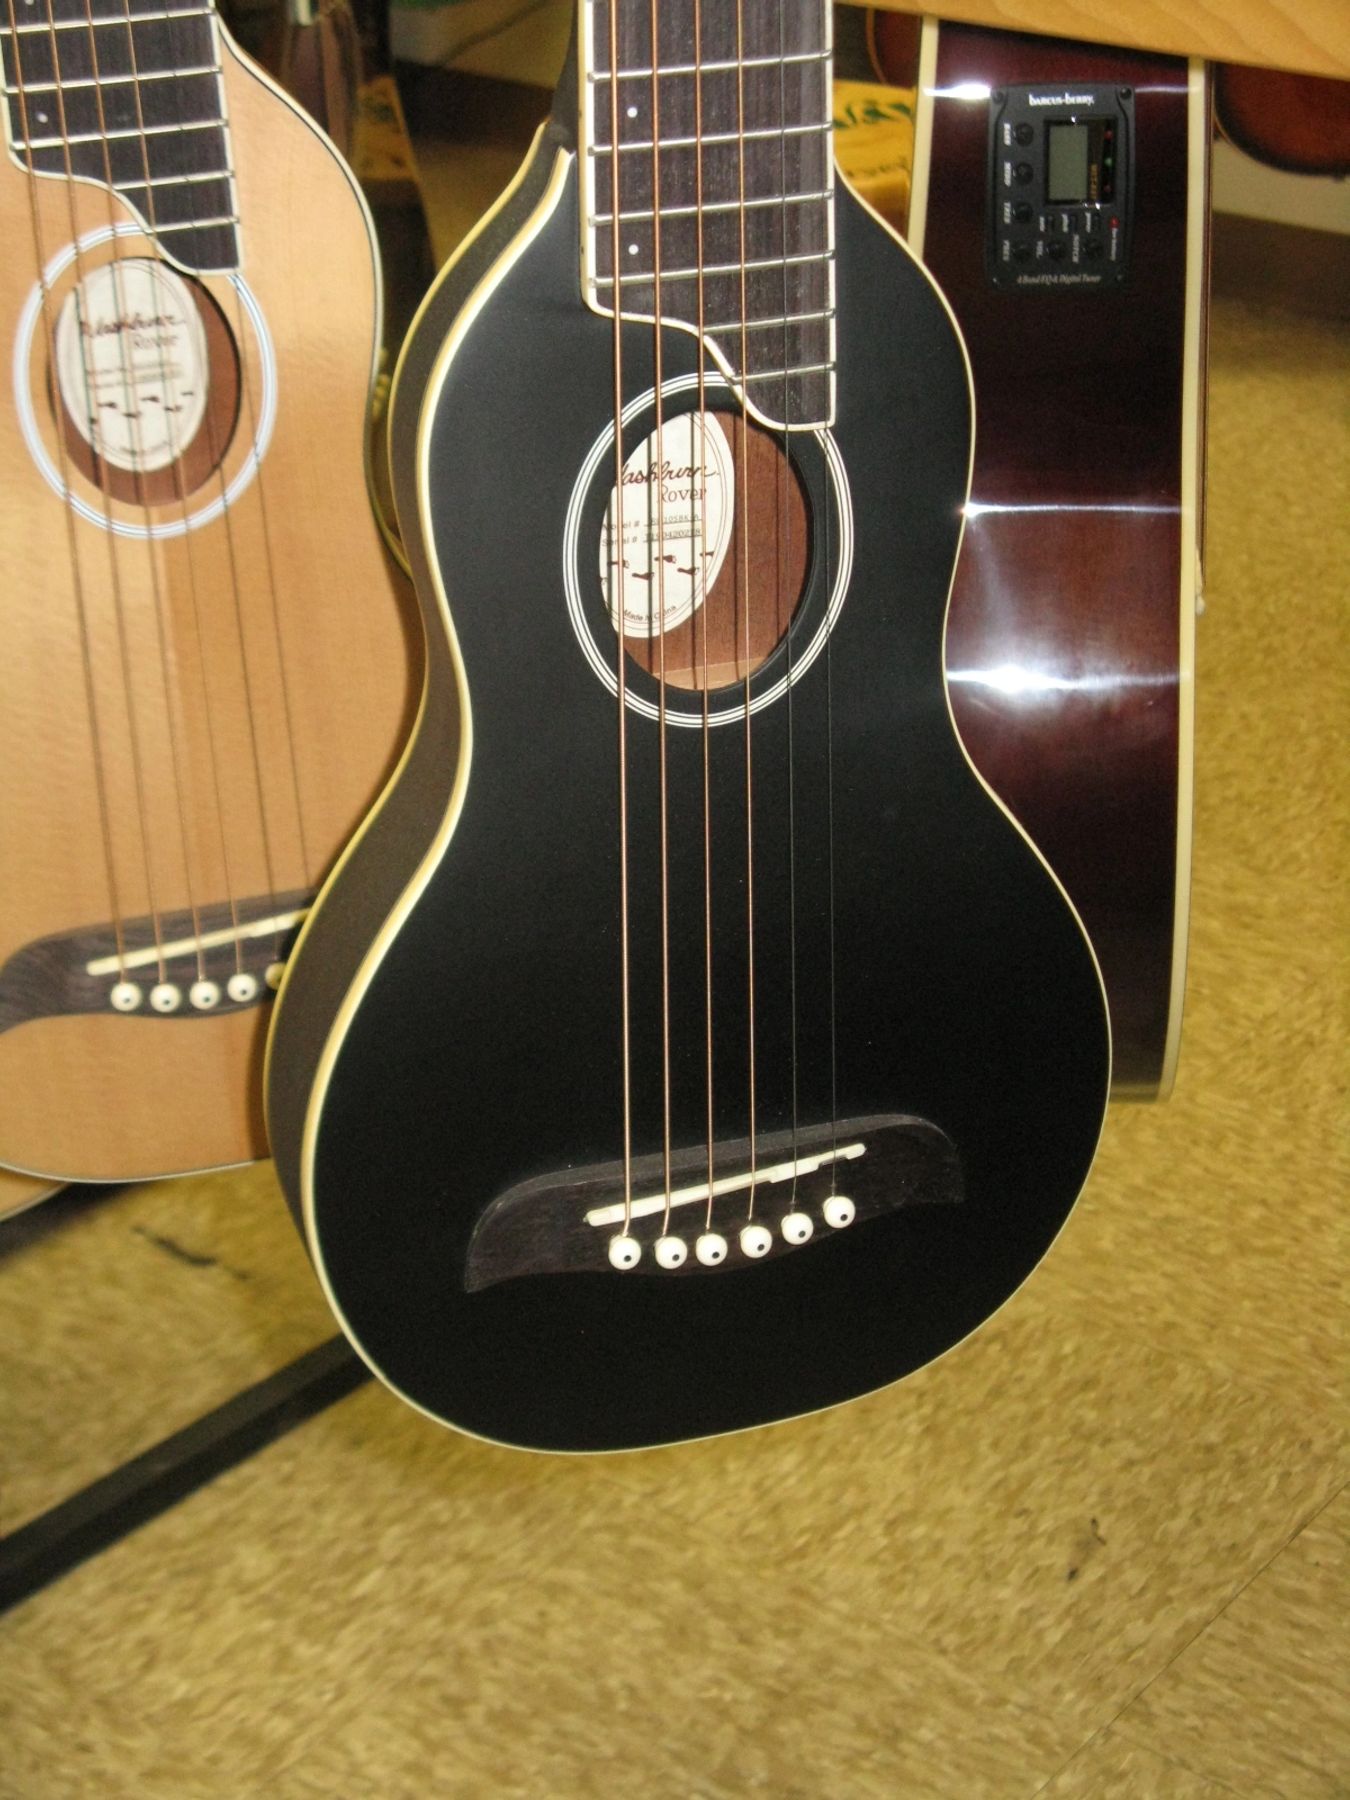 New Washburn Rover Travel Guitar W/Solid Spruce Top & Case.